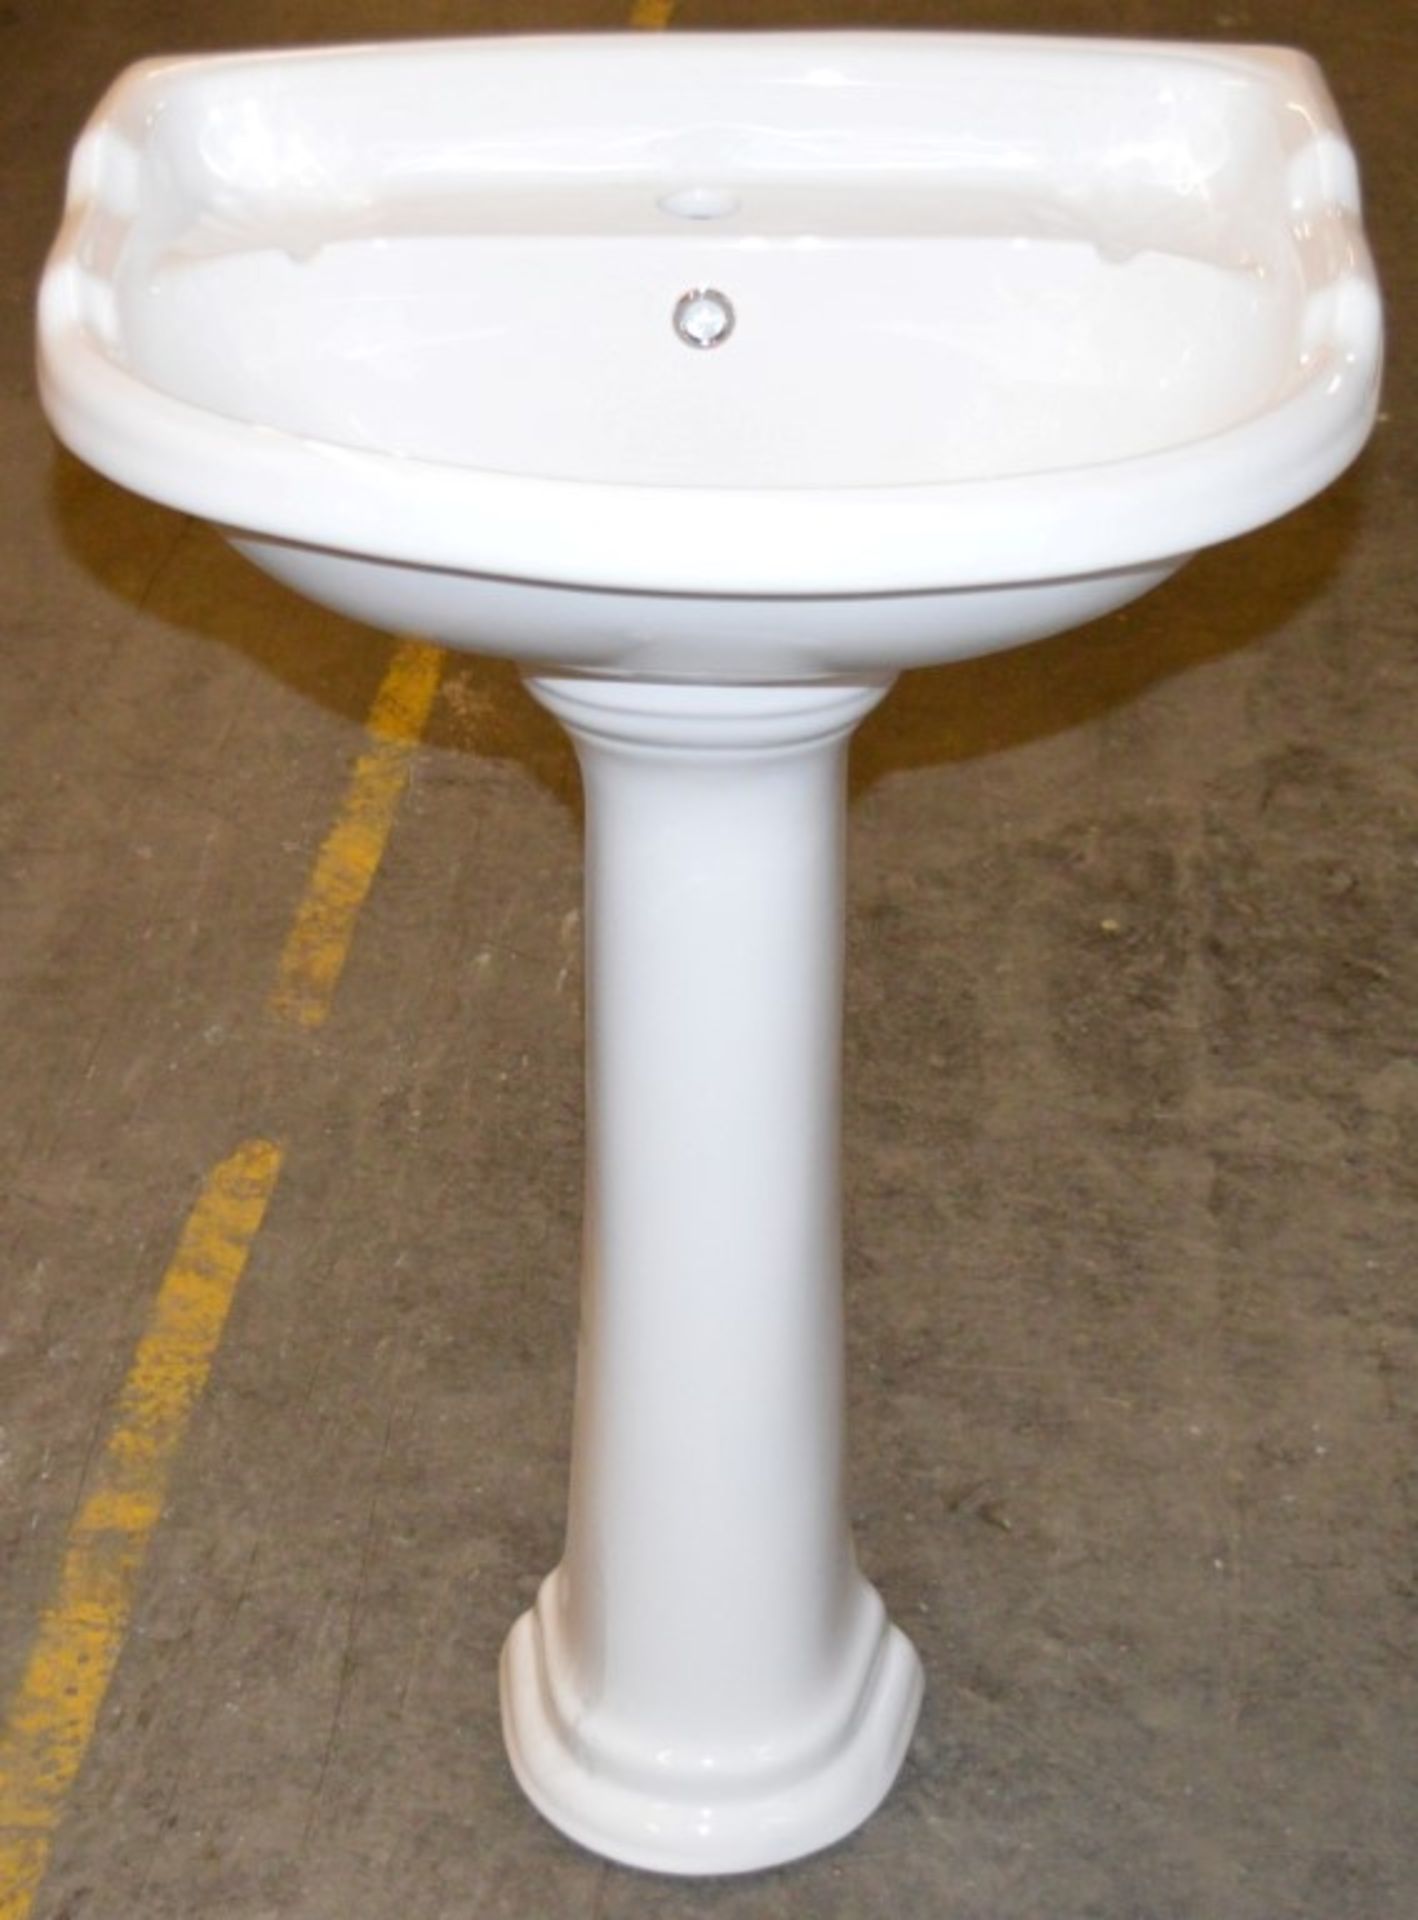 1 x Vogue Bathrooms AUBURY Single Tap Hole SINK BASIN With Pedestal - 580mm Width - Brand New - Image 2 of 6